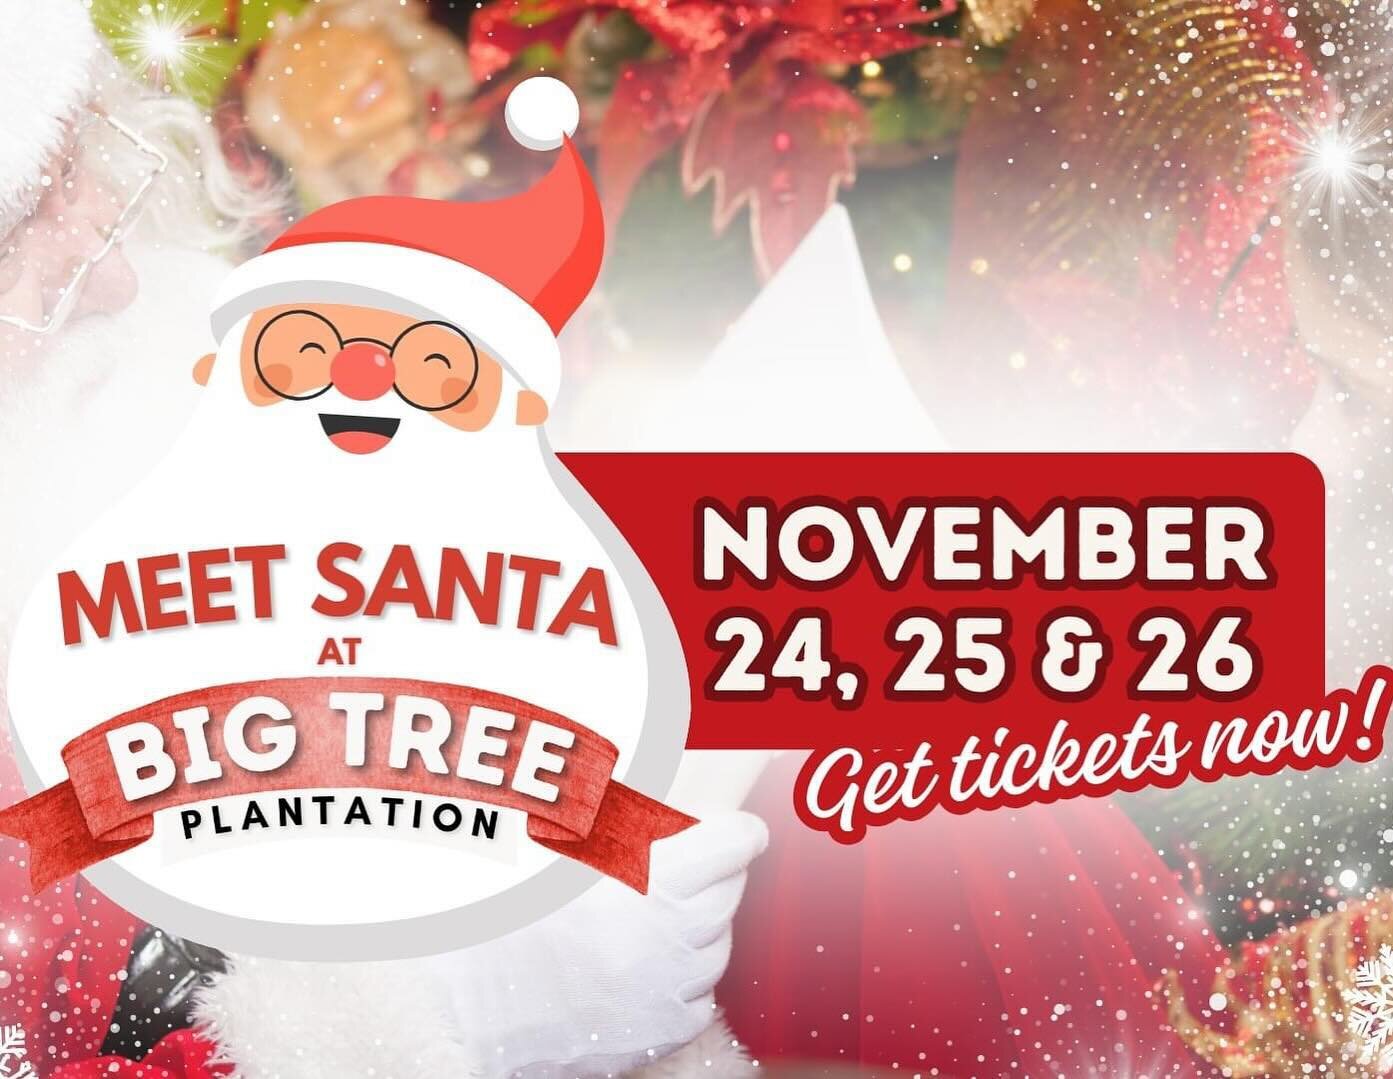 Come get photos with Santa next weekend at Big Tree! Tickets are available on our website bigtreeplantation.com/tickets